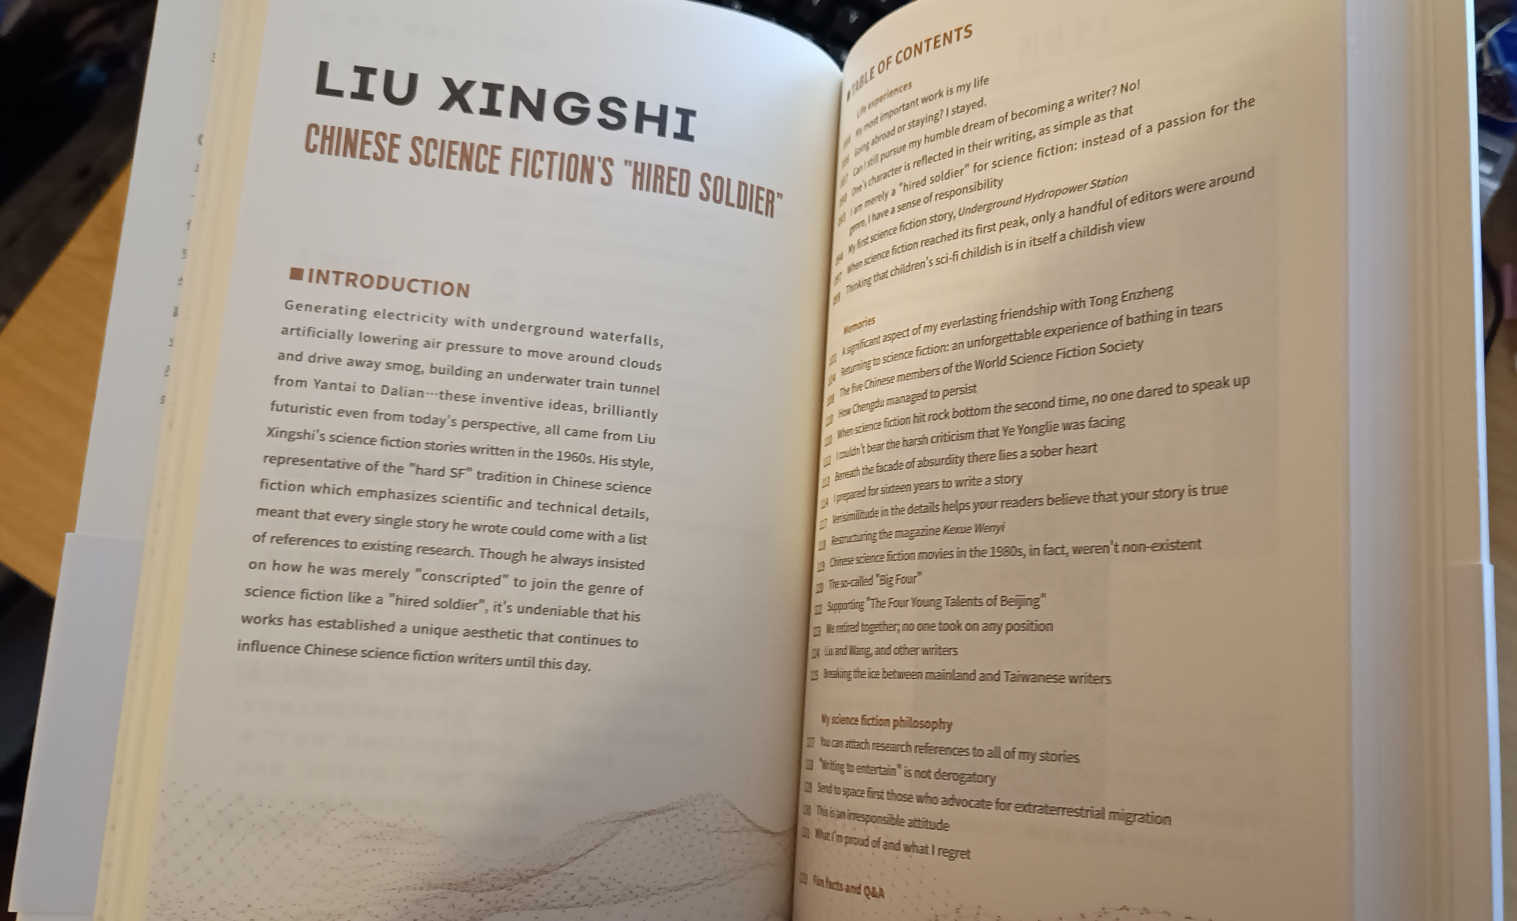 A spread from Chinese SF: An Oral History - Volume 3